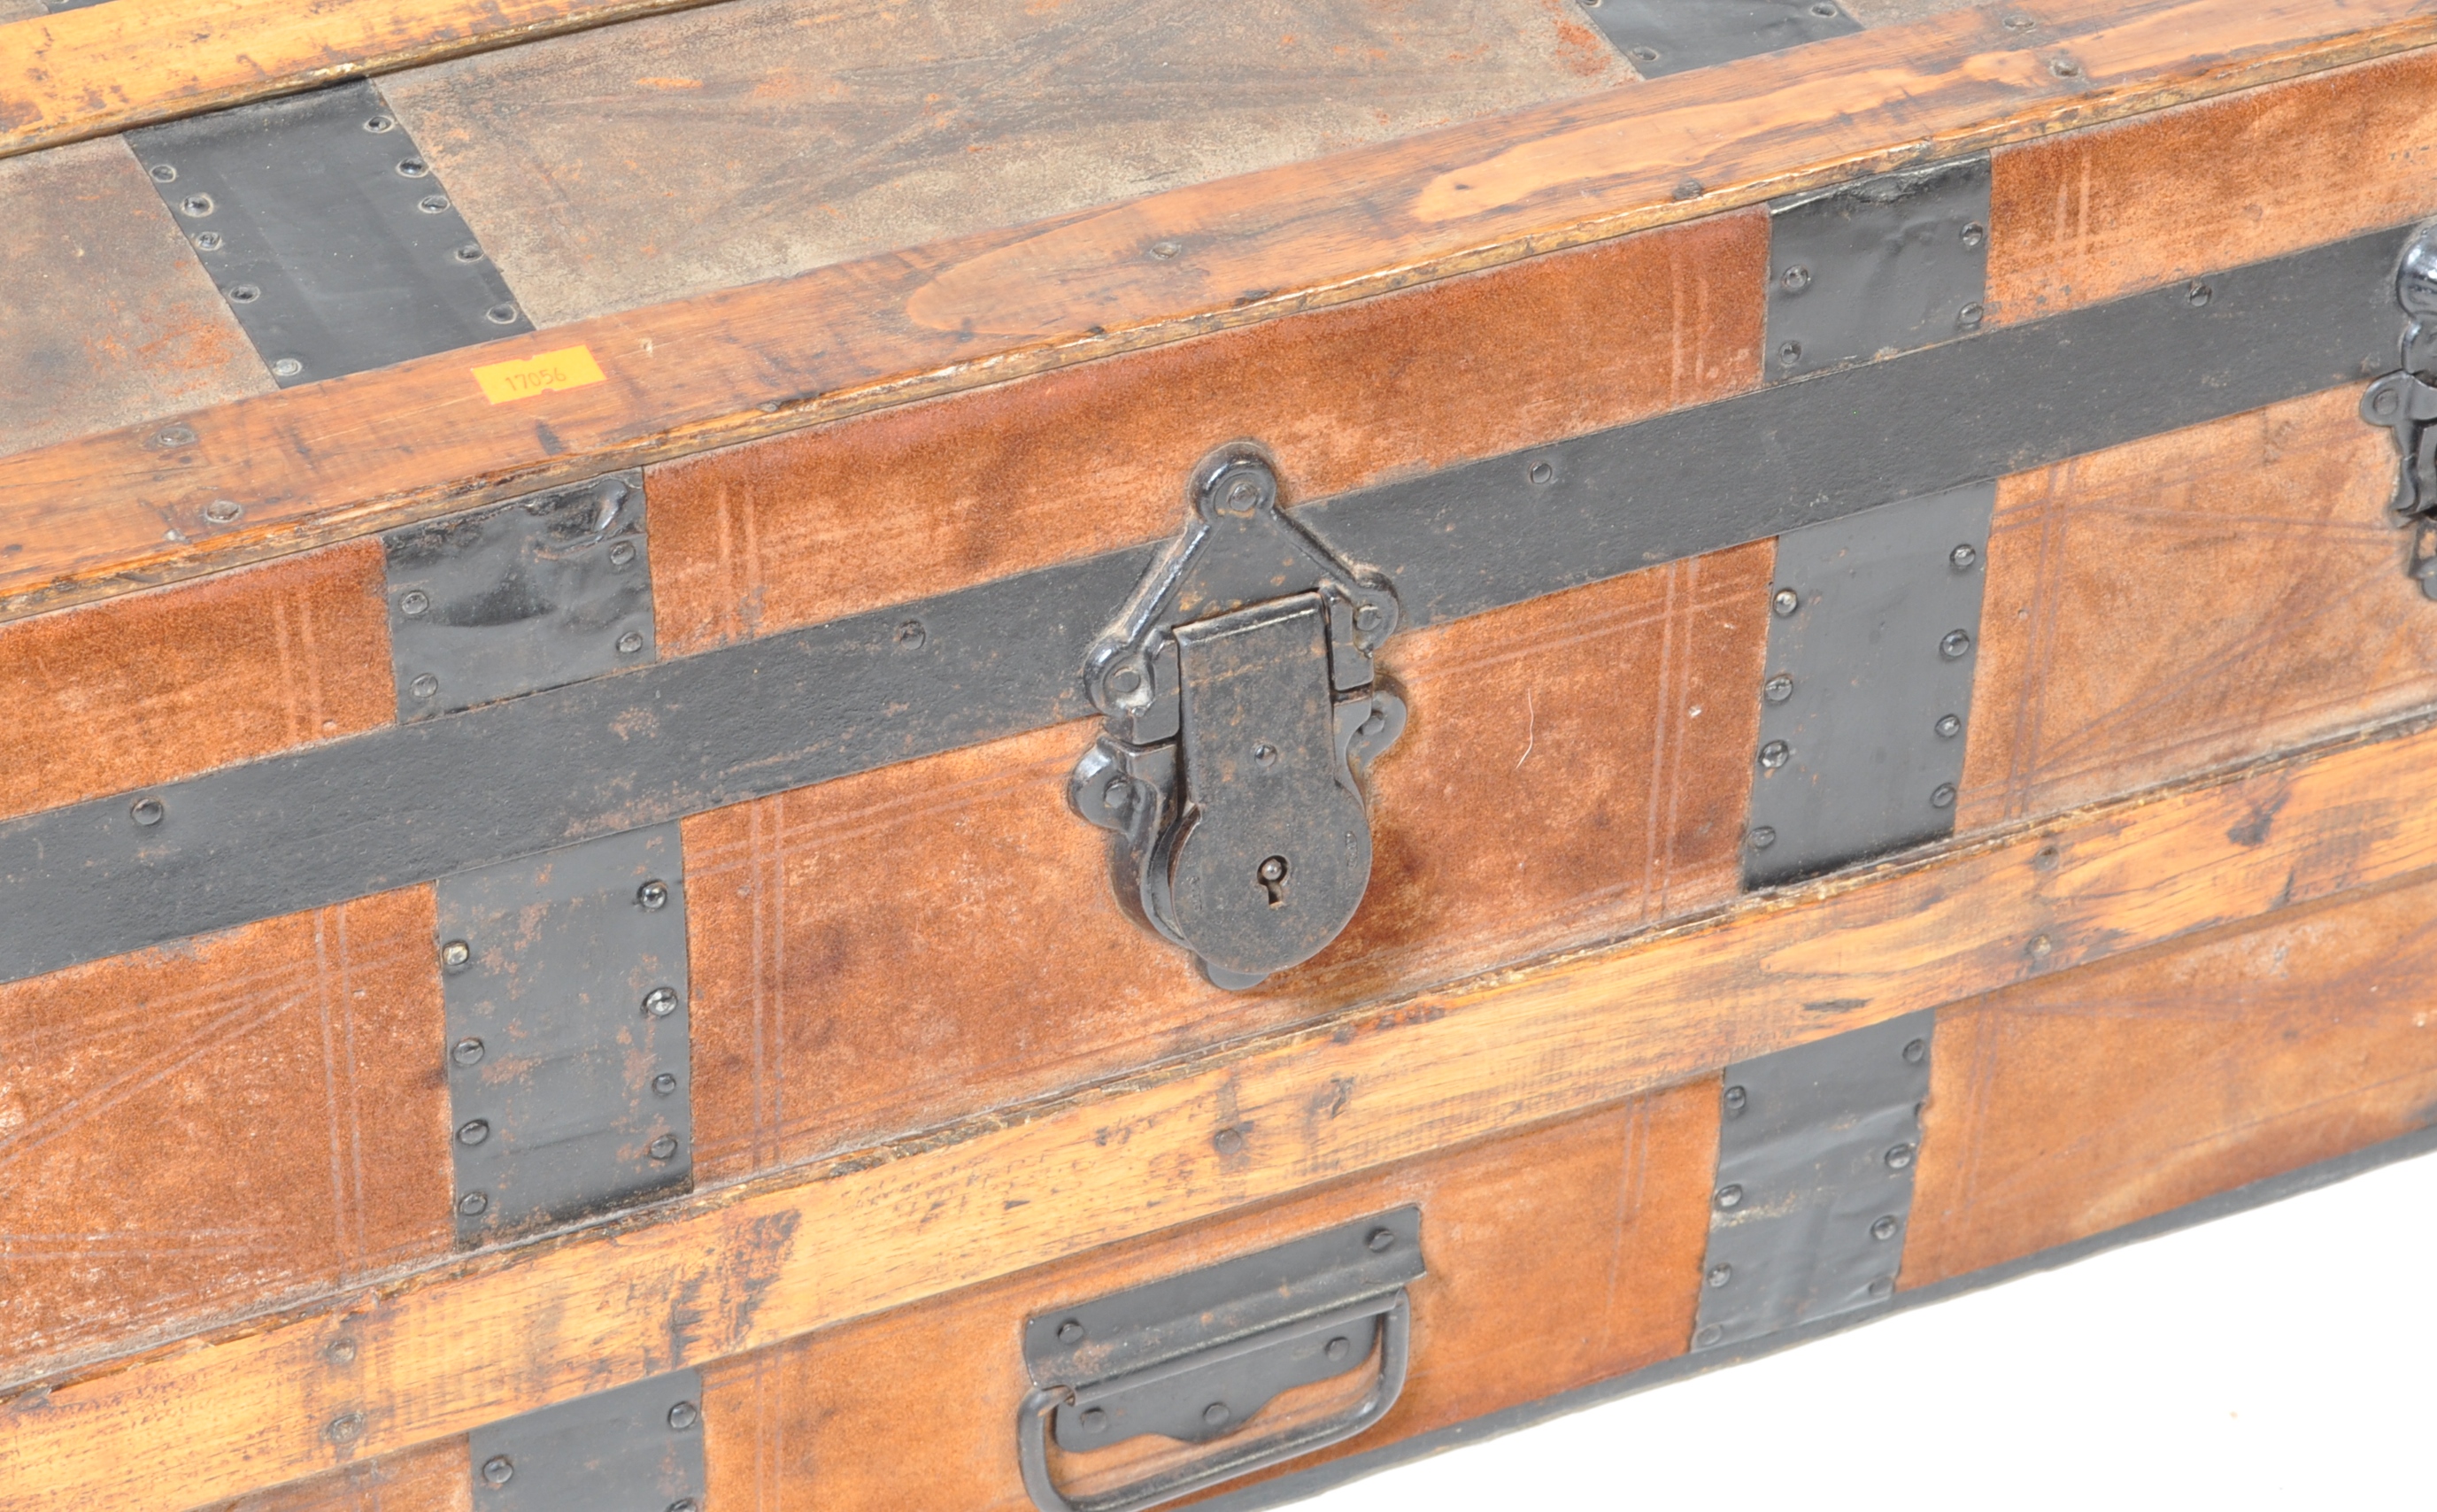 TWO EARLY 20TH CENTURY WOODEN TRUNKS / SHIPPING TRUNKS - Image 3 of 7